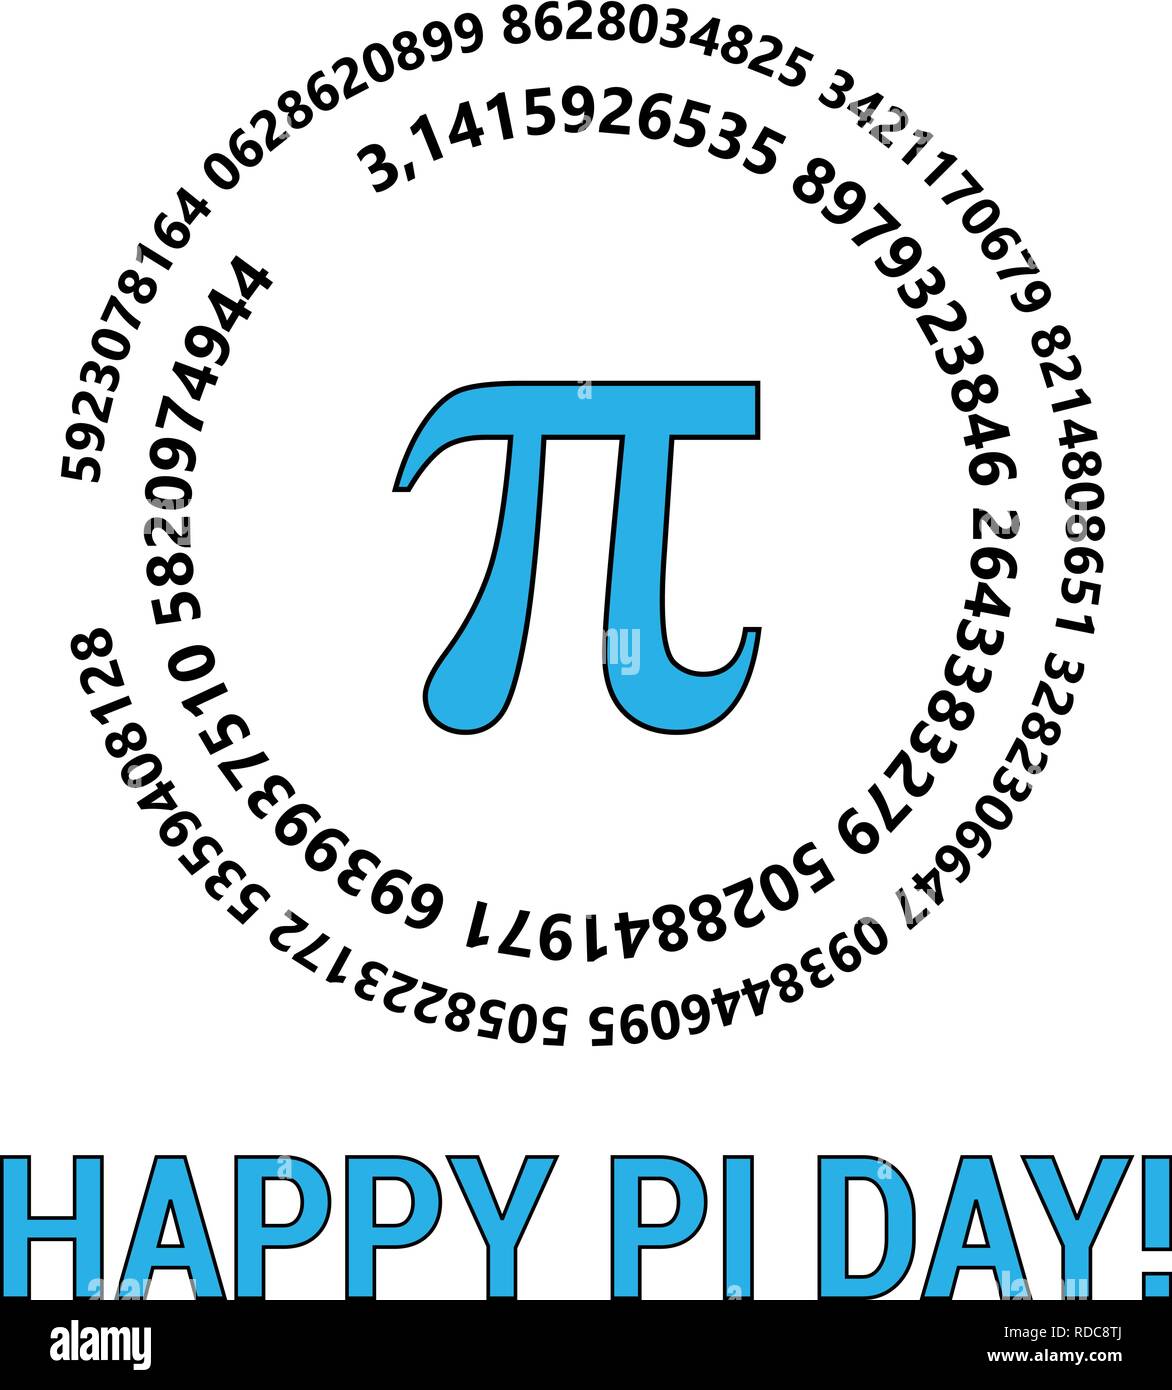 Happy Pi Day Celebrate Pi Day. Mathematical constant. March 14th. Ratio of a circle s circumference to its diameter. Stock Vector